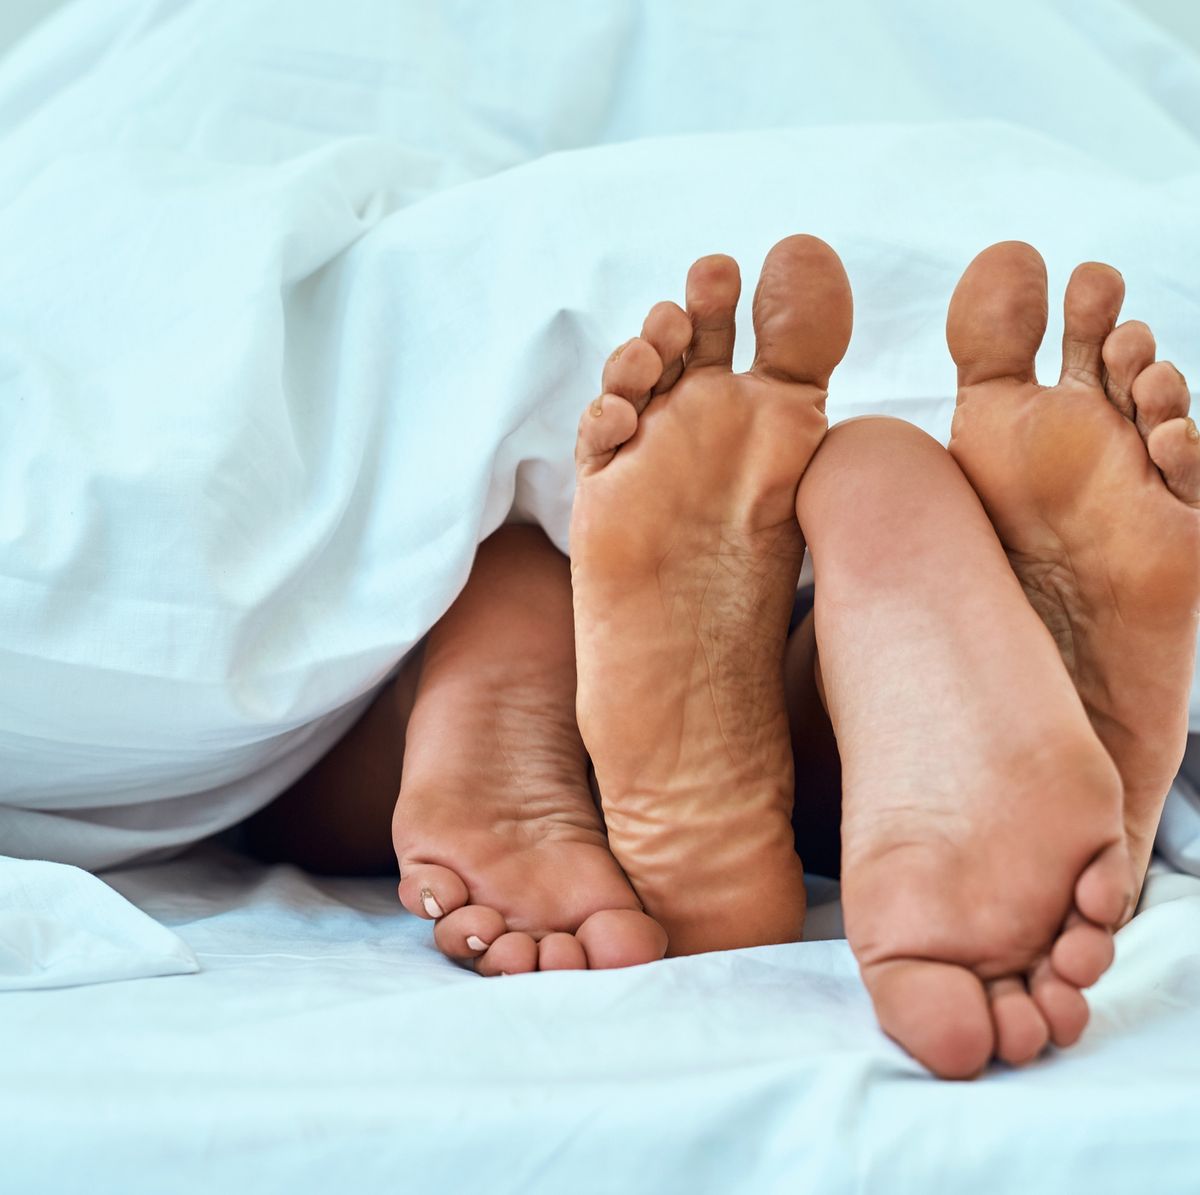 What Is Toe Sucking? Definition And Best Tips From Sex Experts